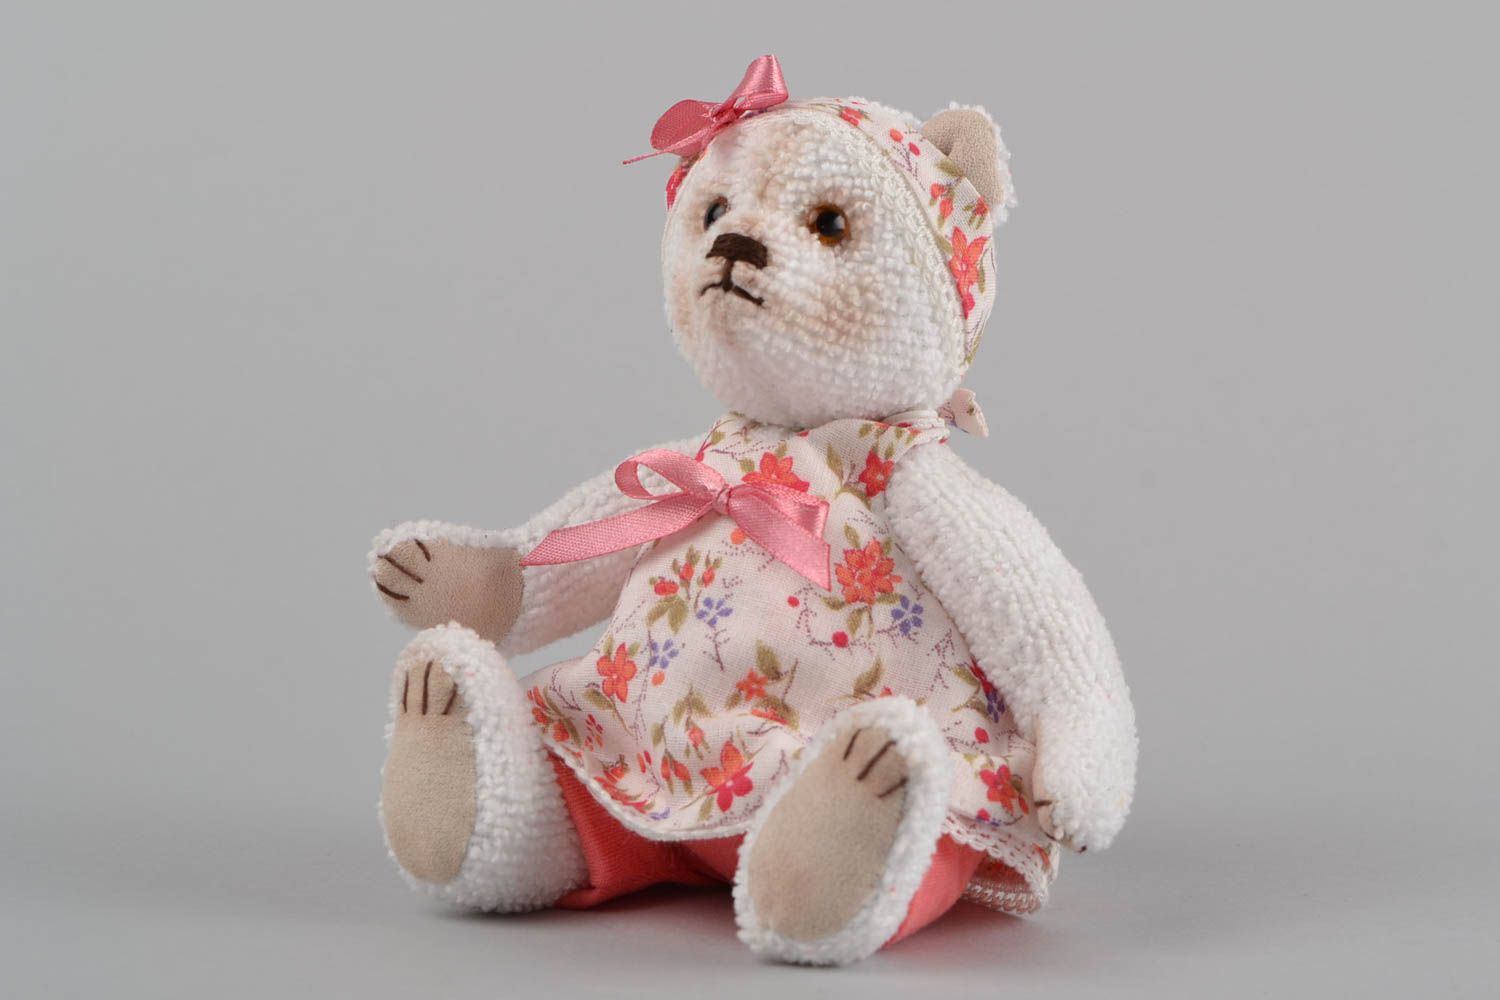 Handmade designer small fabric soft toy white bear in floral dress with headband photo 3